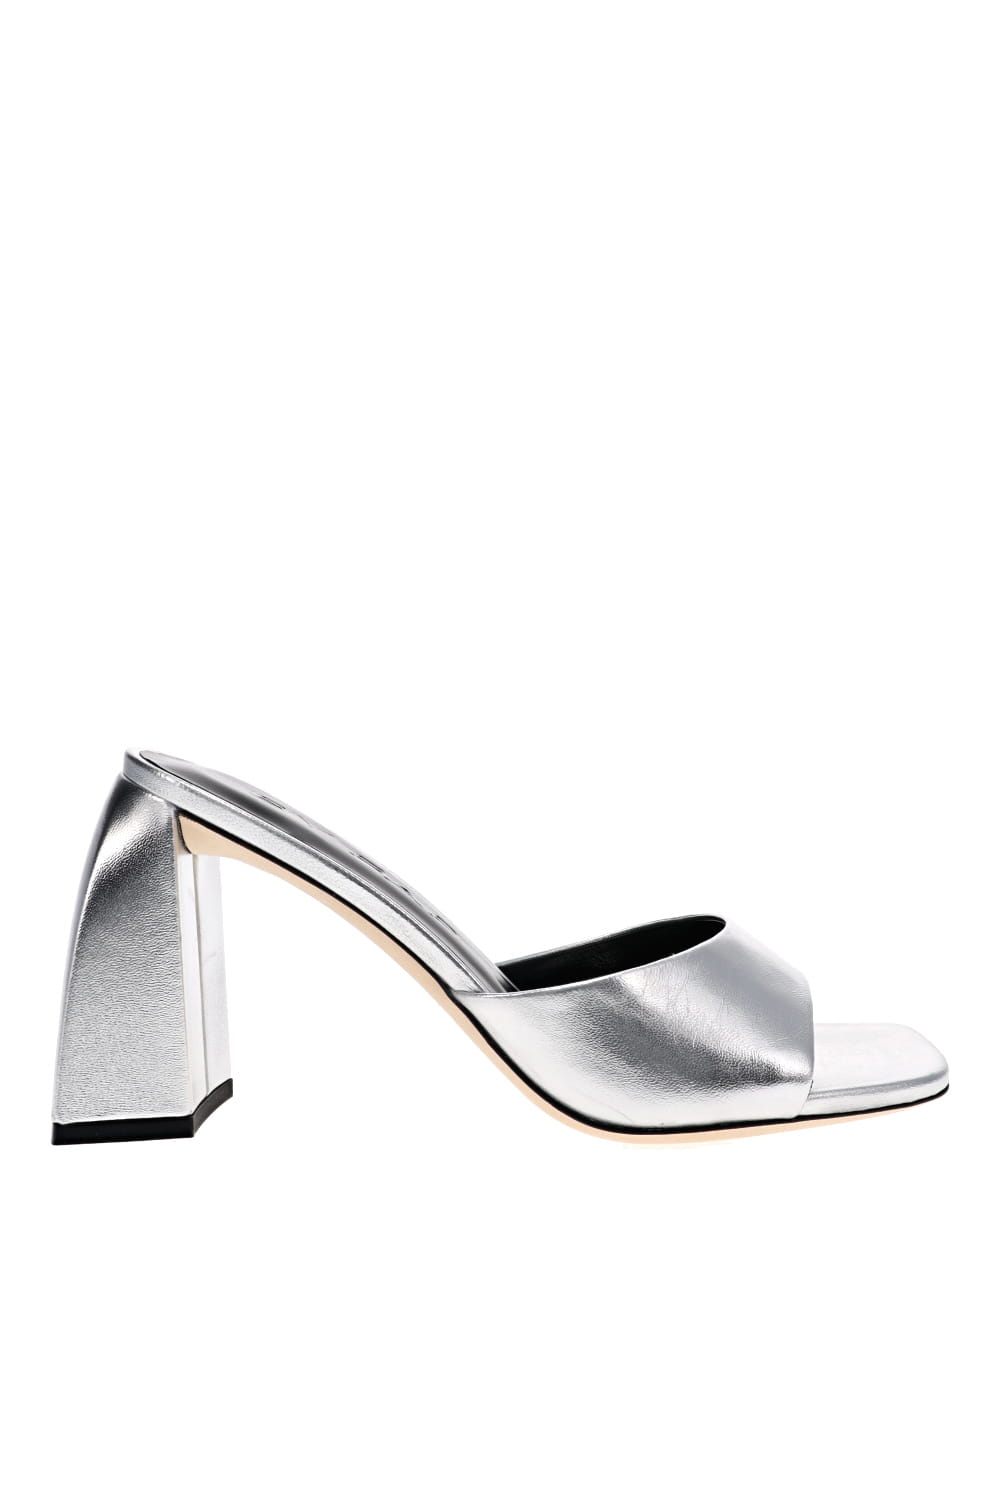 BY FAR Michele Silver Metallic Leather Mules